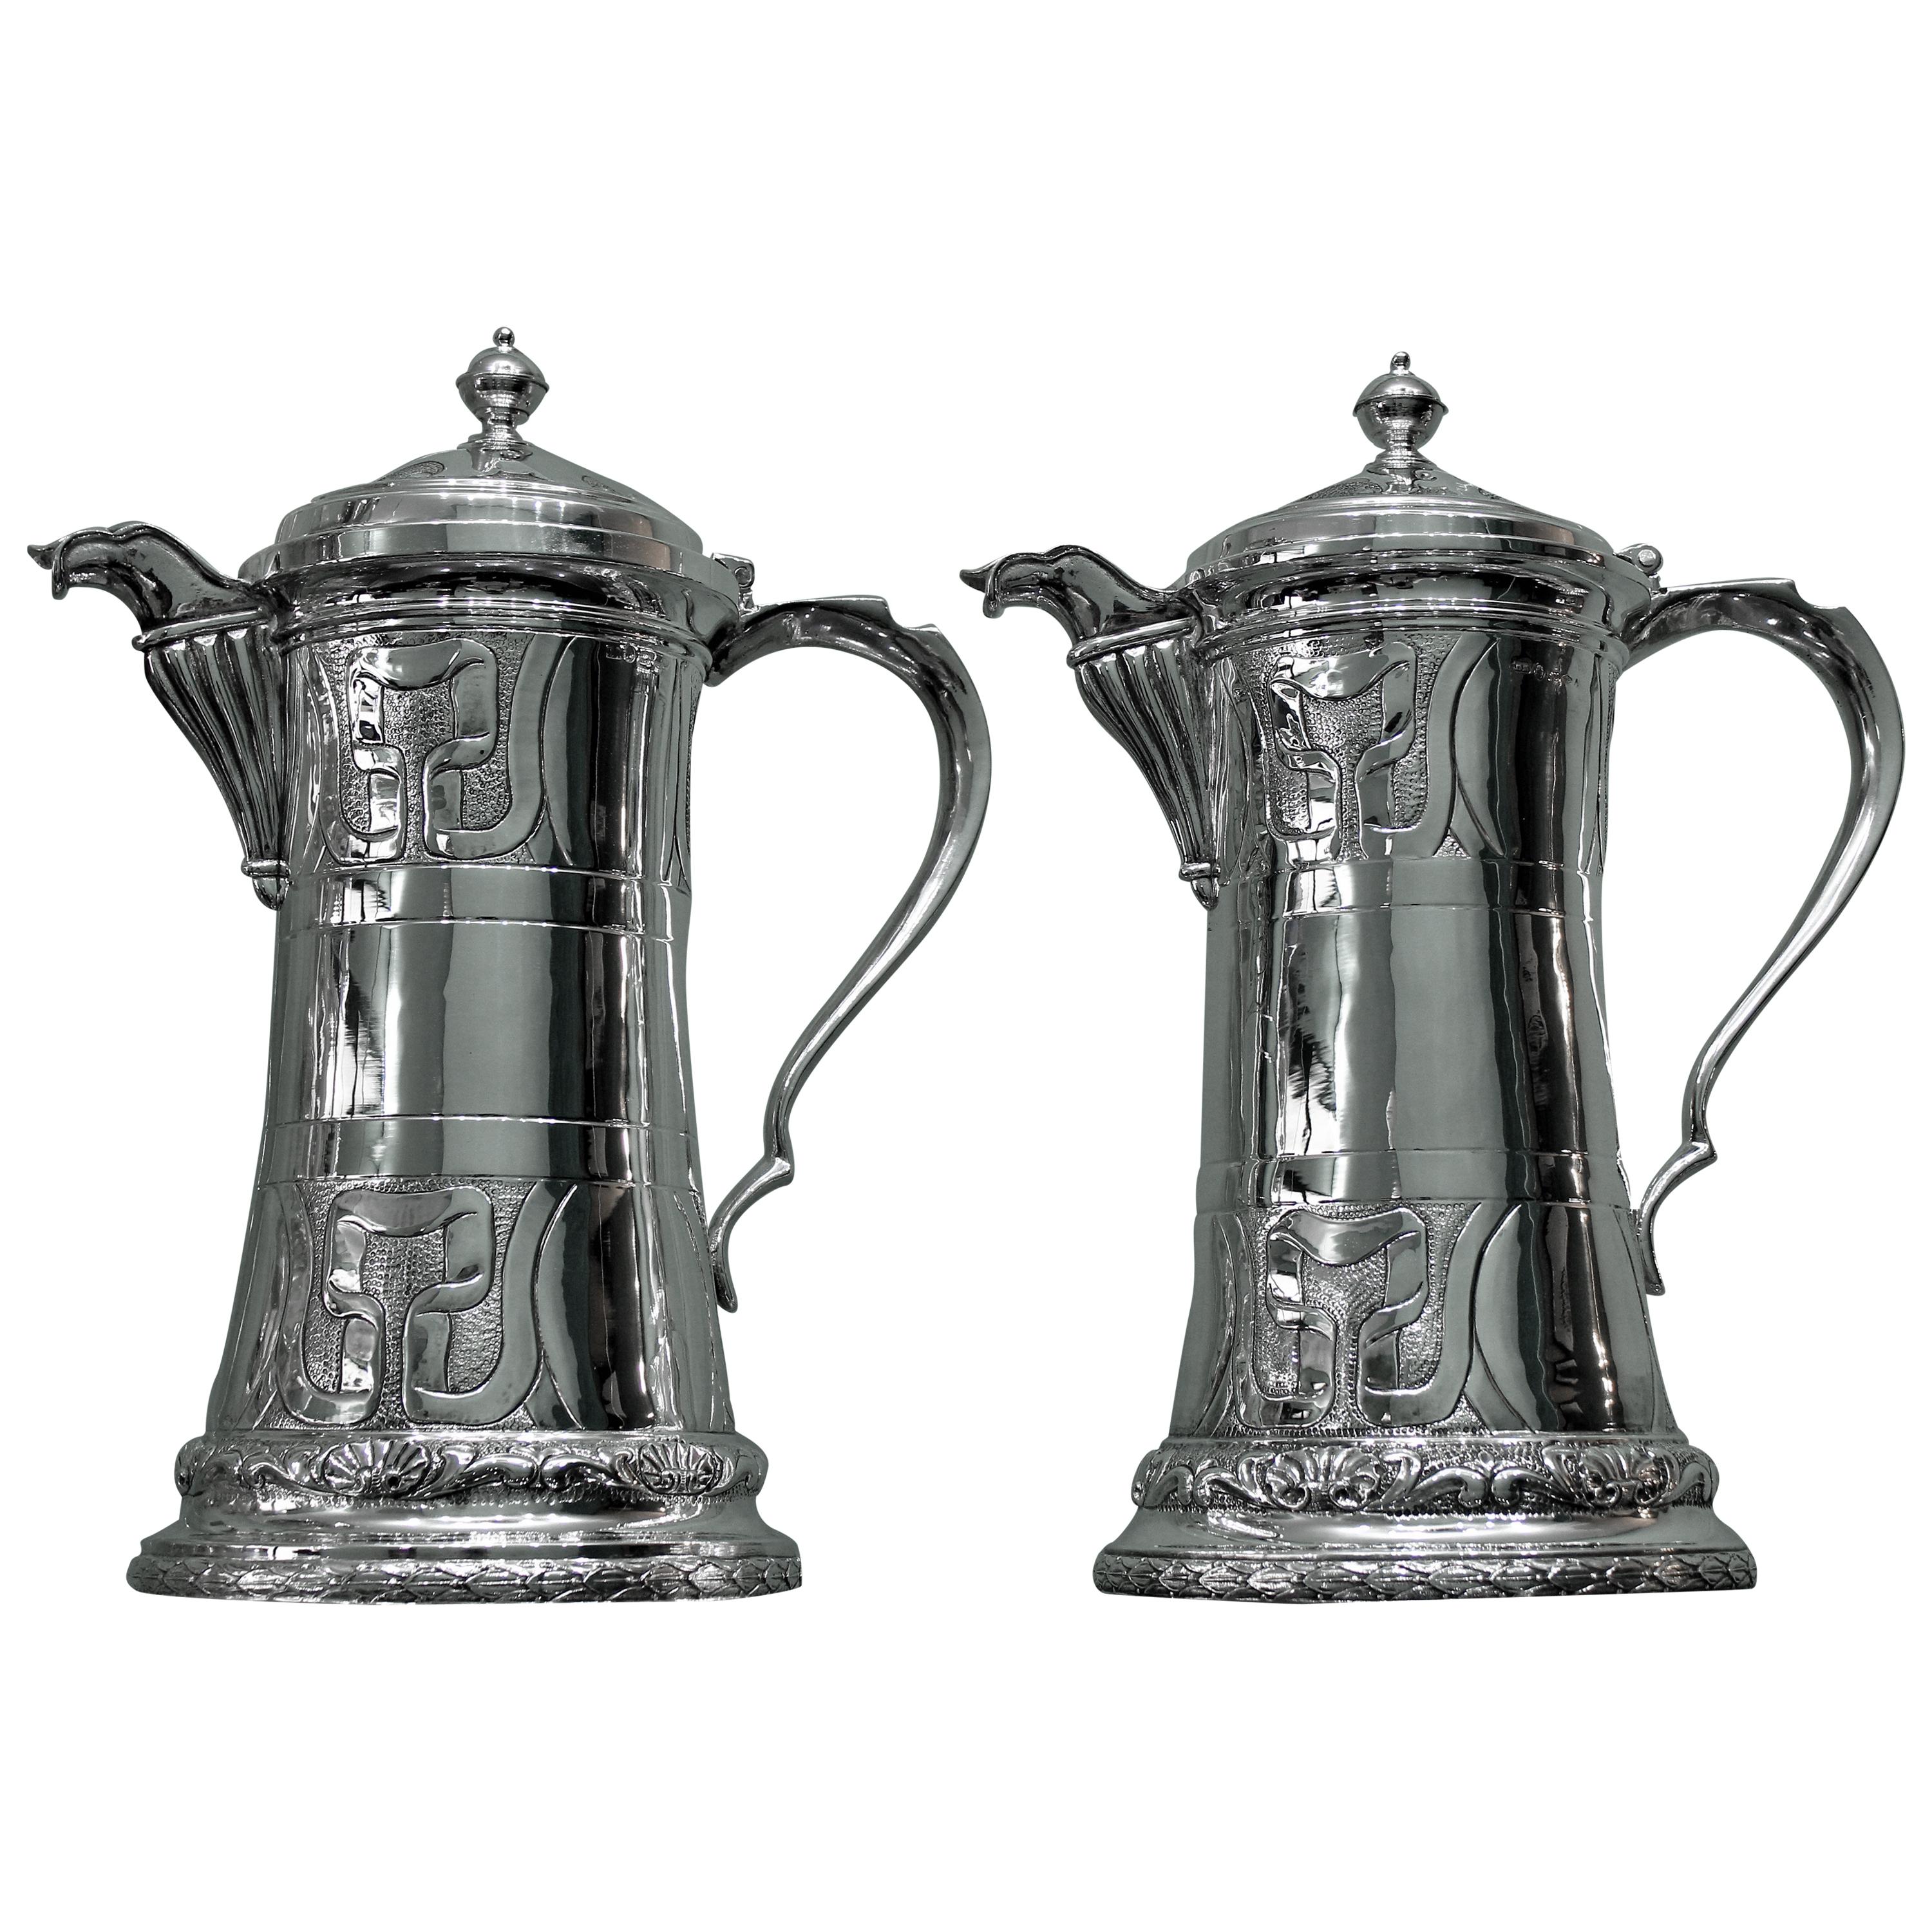 Brandimarte 20th Century Pair of Silver Engraved Cocktail Pitchers Italy, 1950 For Sale